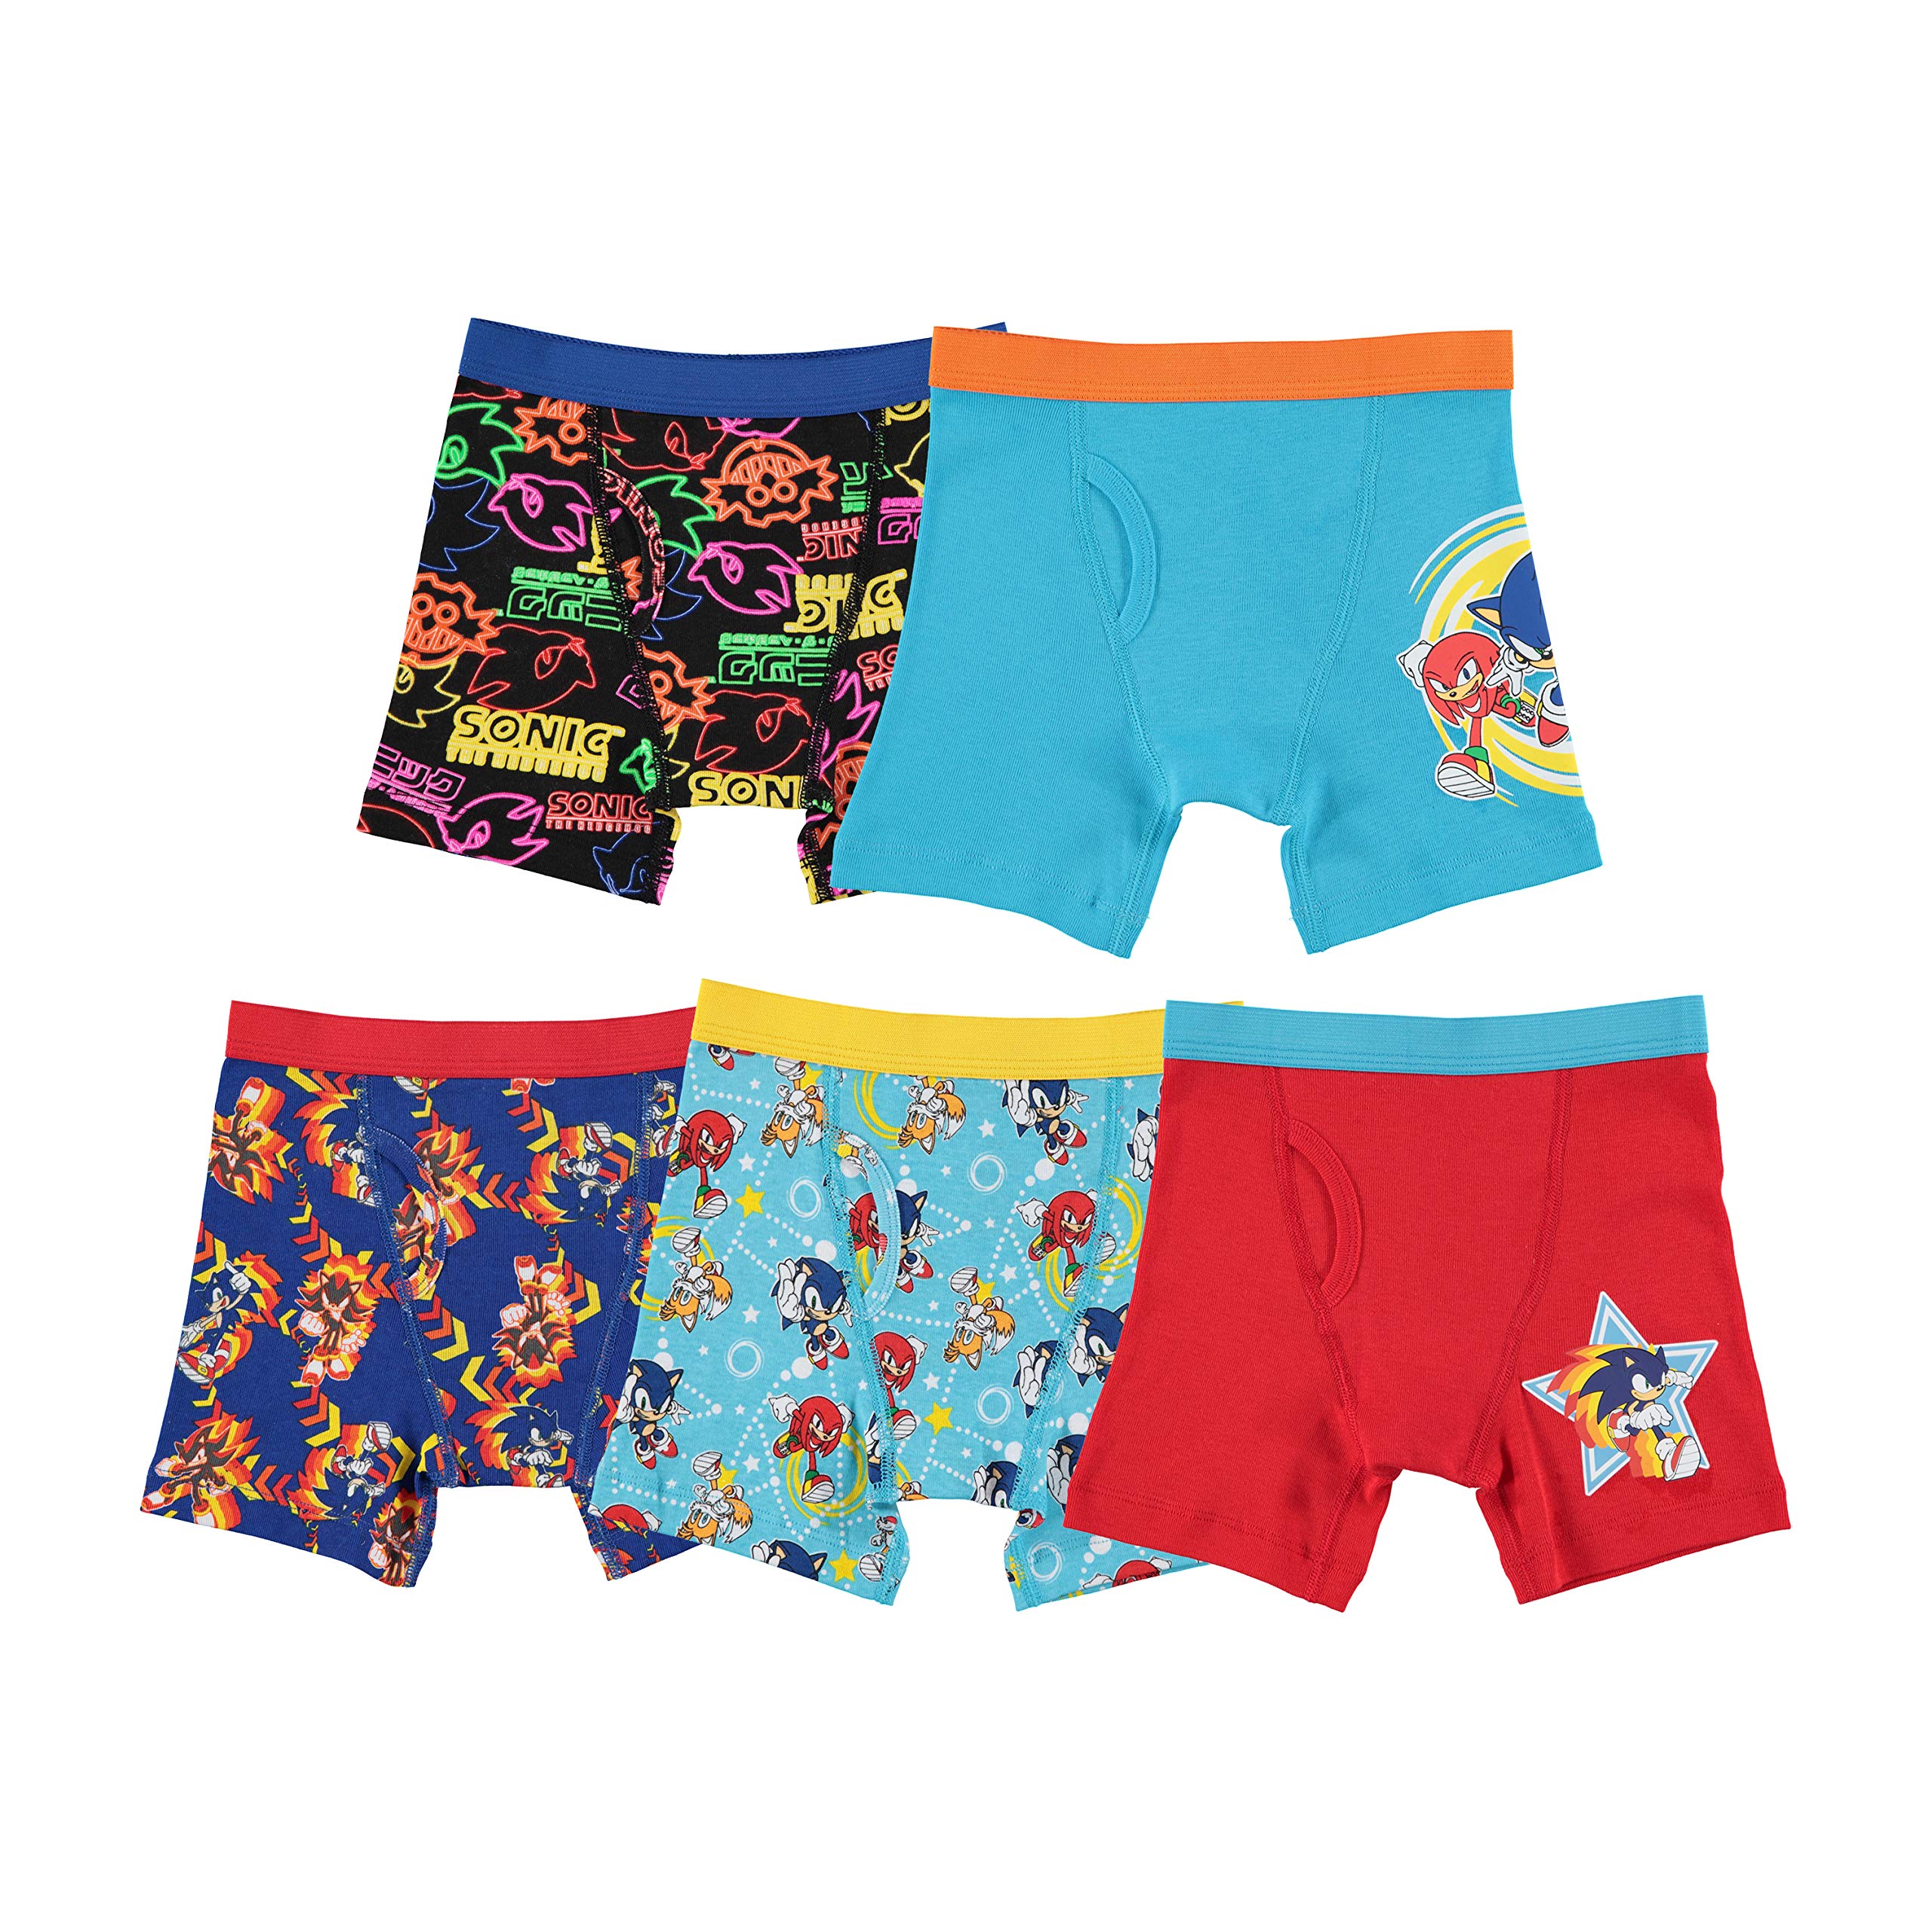 Sonic The Hedgehog boys Sonic the Hedgehog Boys' Briefs and Boxer Briefs Multipacks Available in Sizes 4, 6, 8, 10, and 12